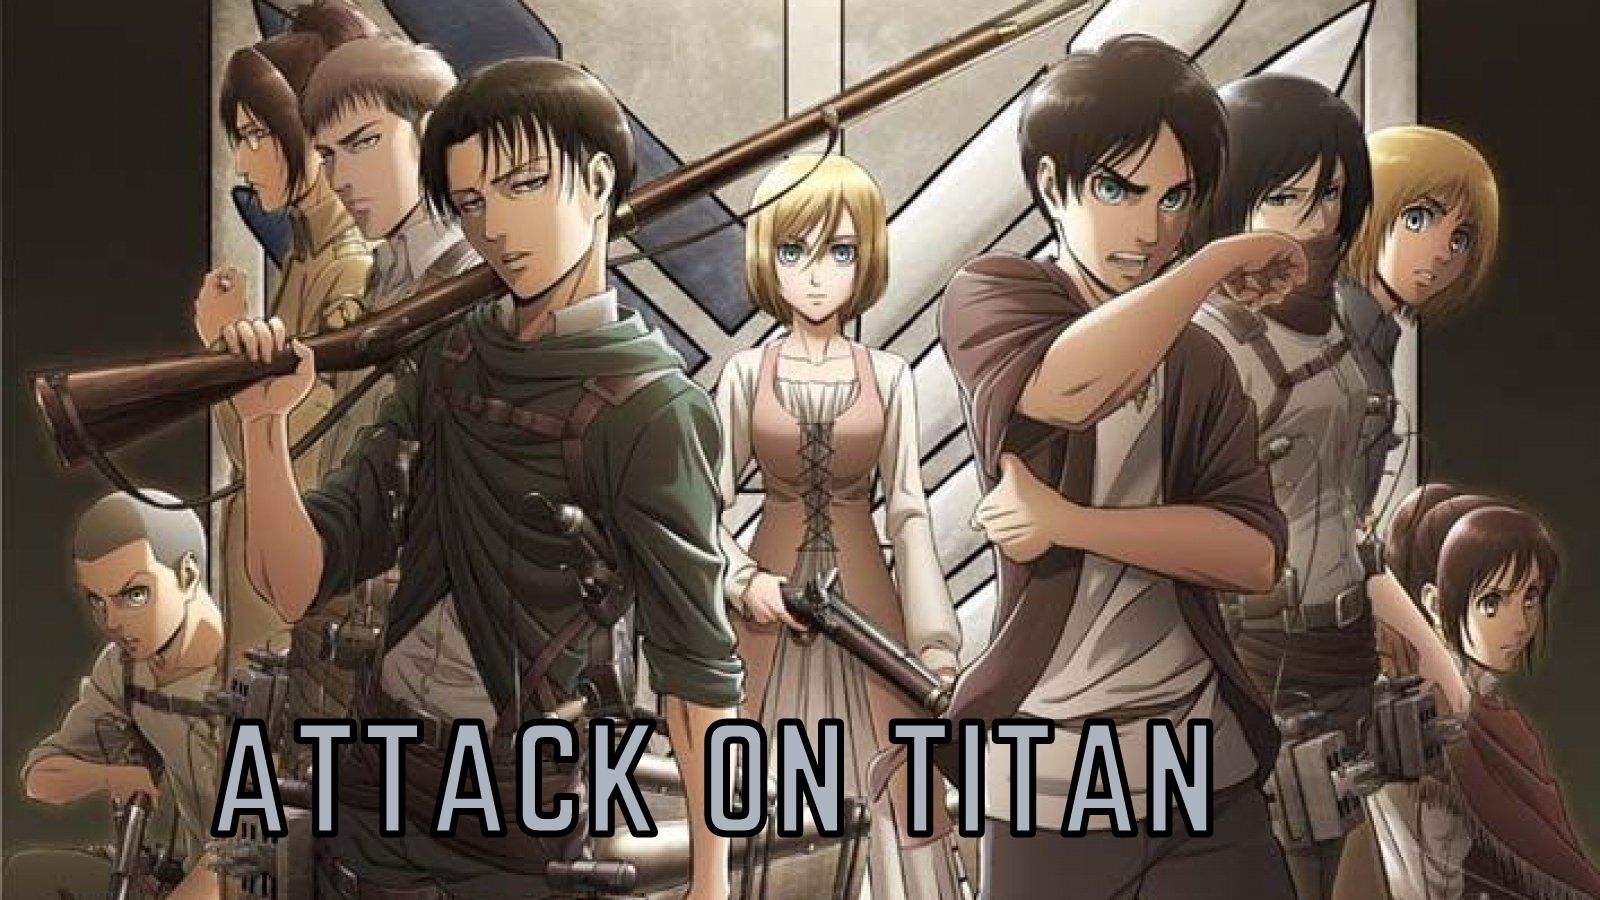 AOT Chapter 139 Release Date And Spoilers: Find Out Eren's Fate In The...